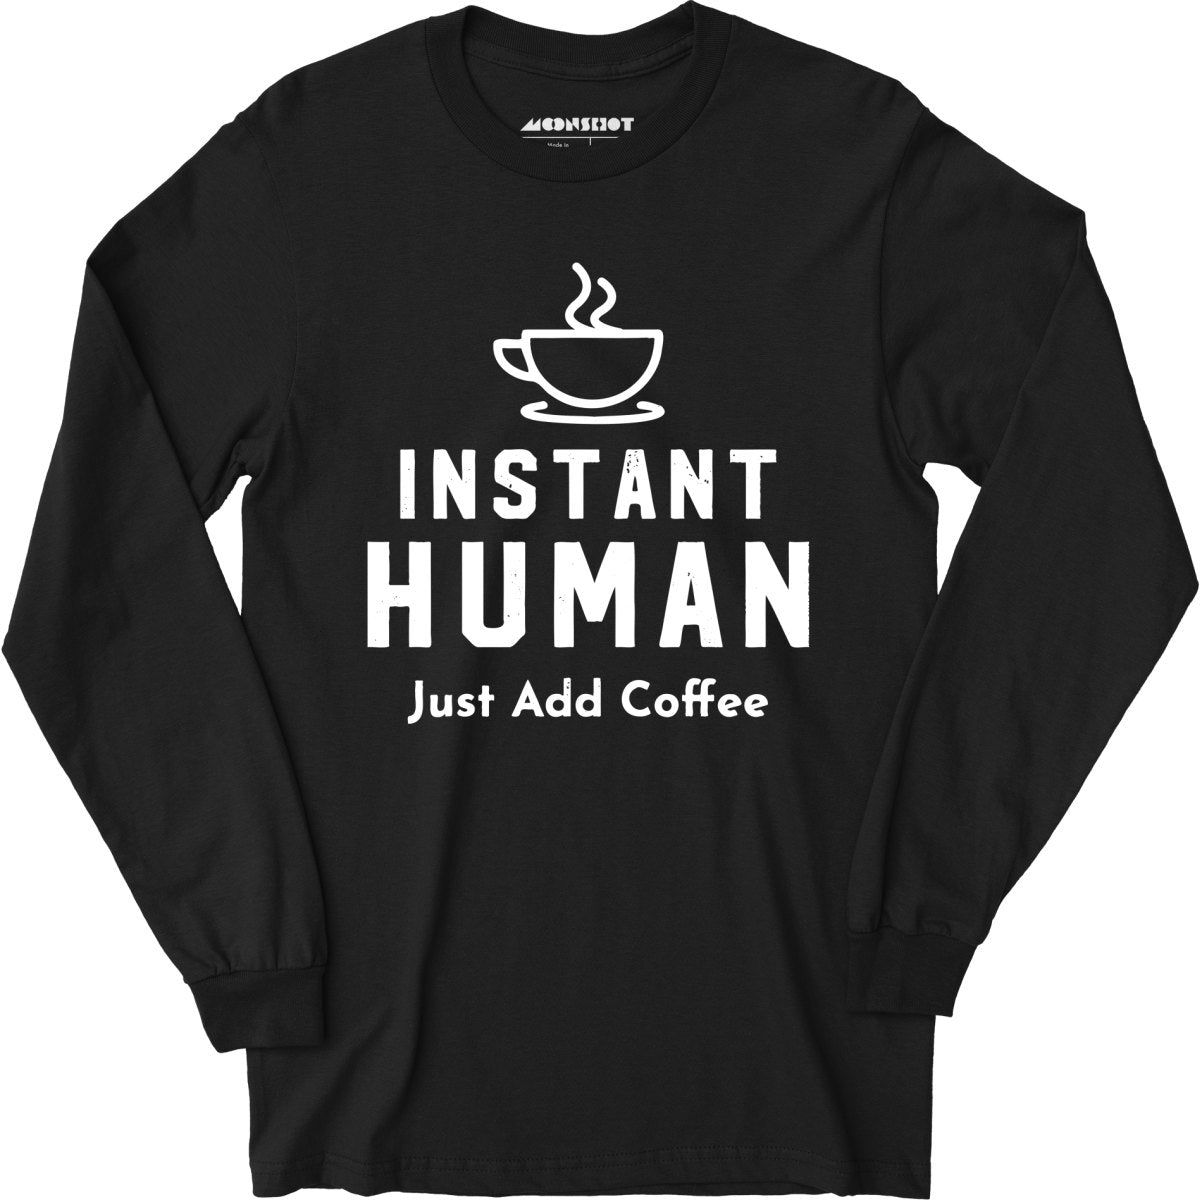 Instant Human Just Add Coffee - Long Sleeve T-Shirt